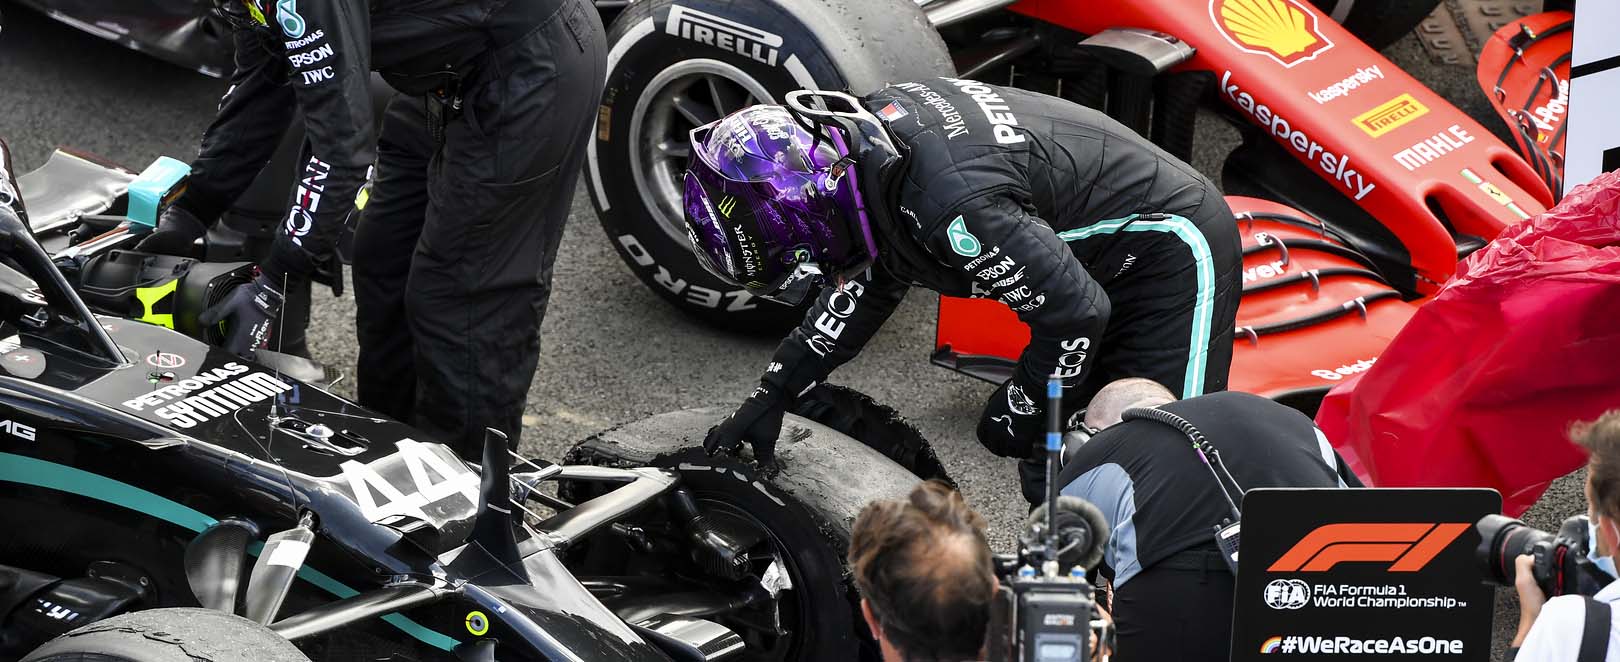 Lewis Hamilton examining his tyre after a puncture at the end of the 2020 British Grand Prix